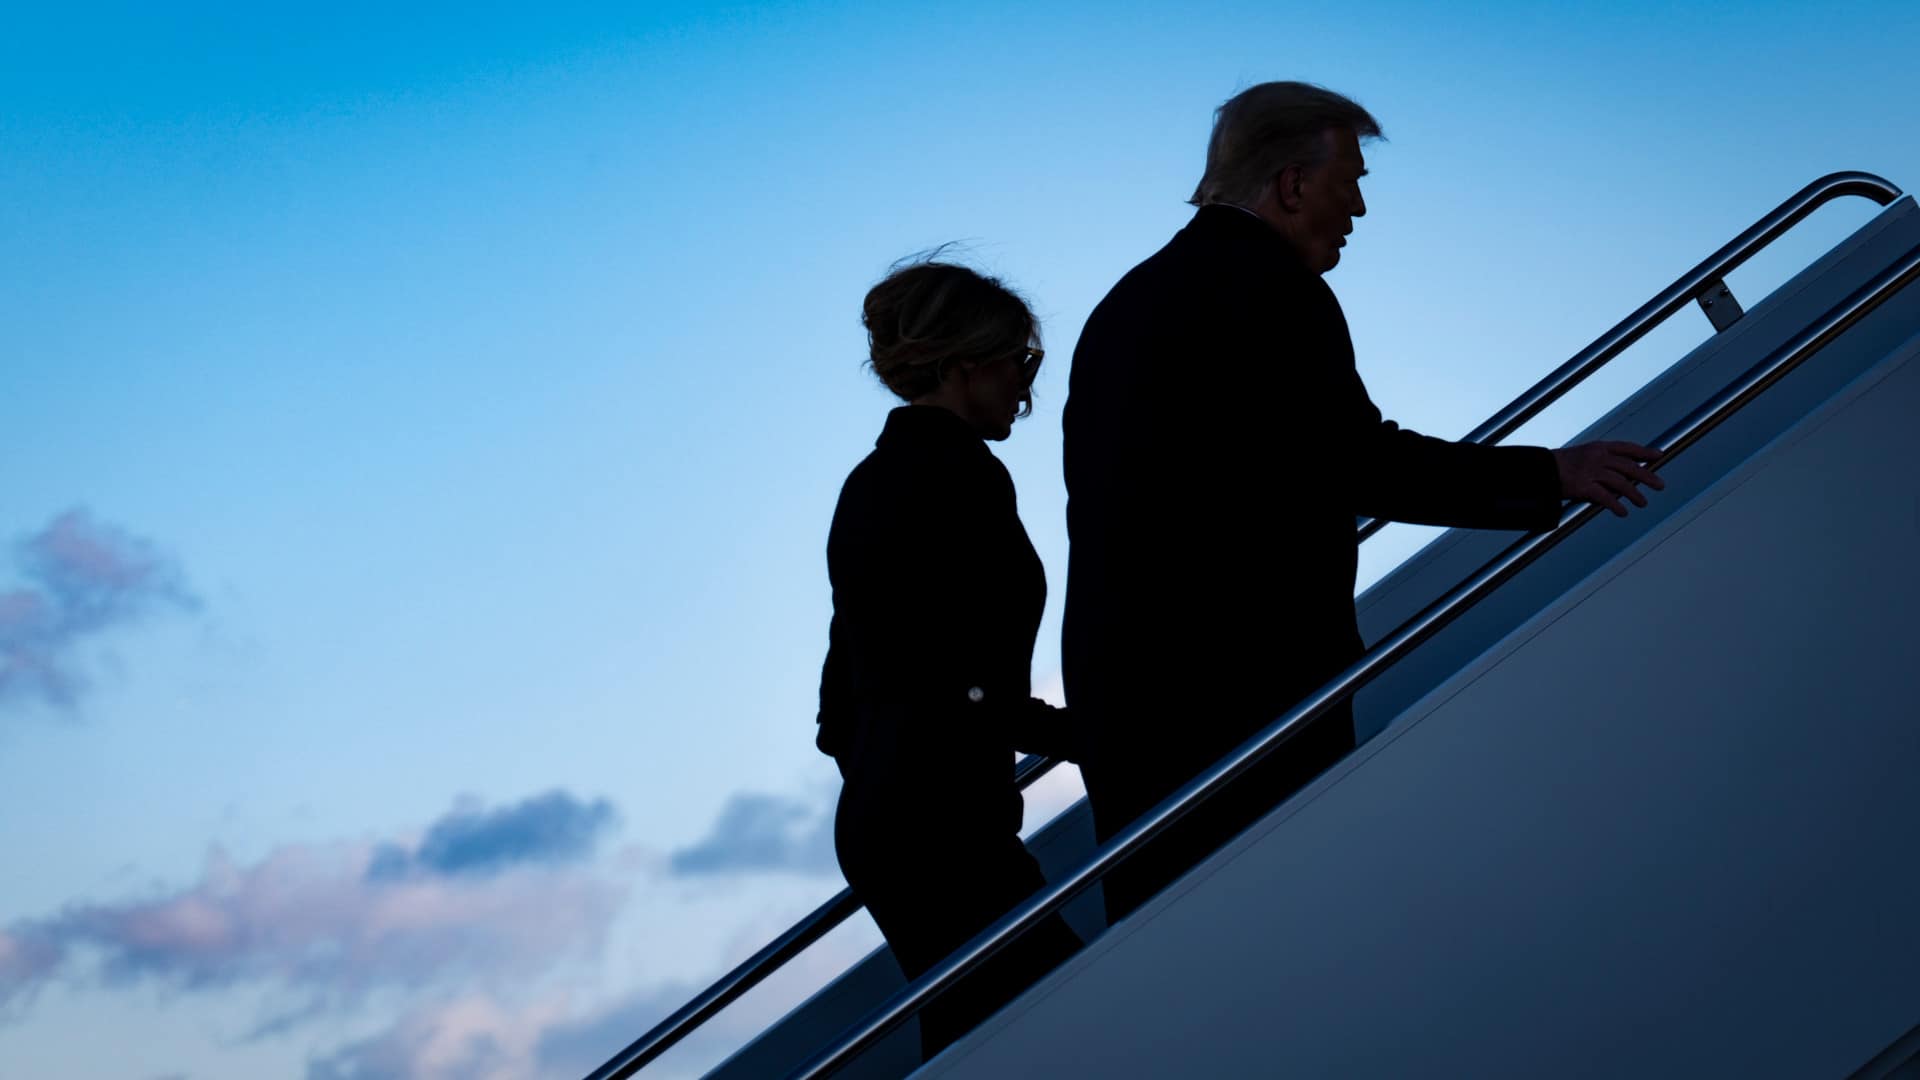 President Donald Trump and First Lady Melania Trump depart Washington D.C. on Jan. 20. Trump is the first president in more than 150 years to refuse to attend his successor's inauguration.